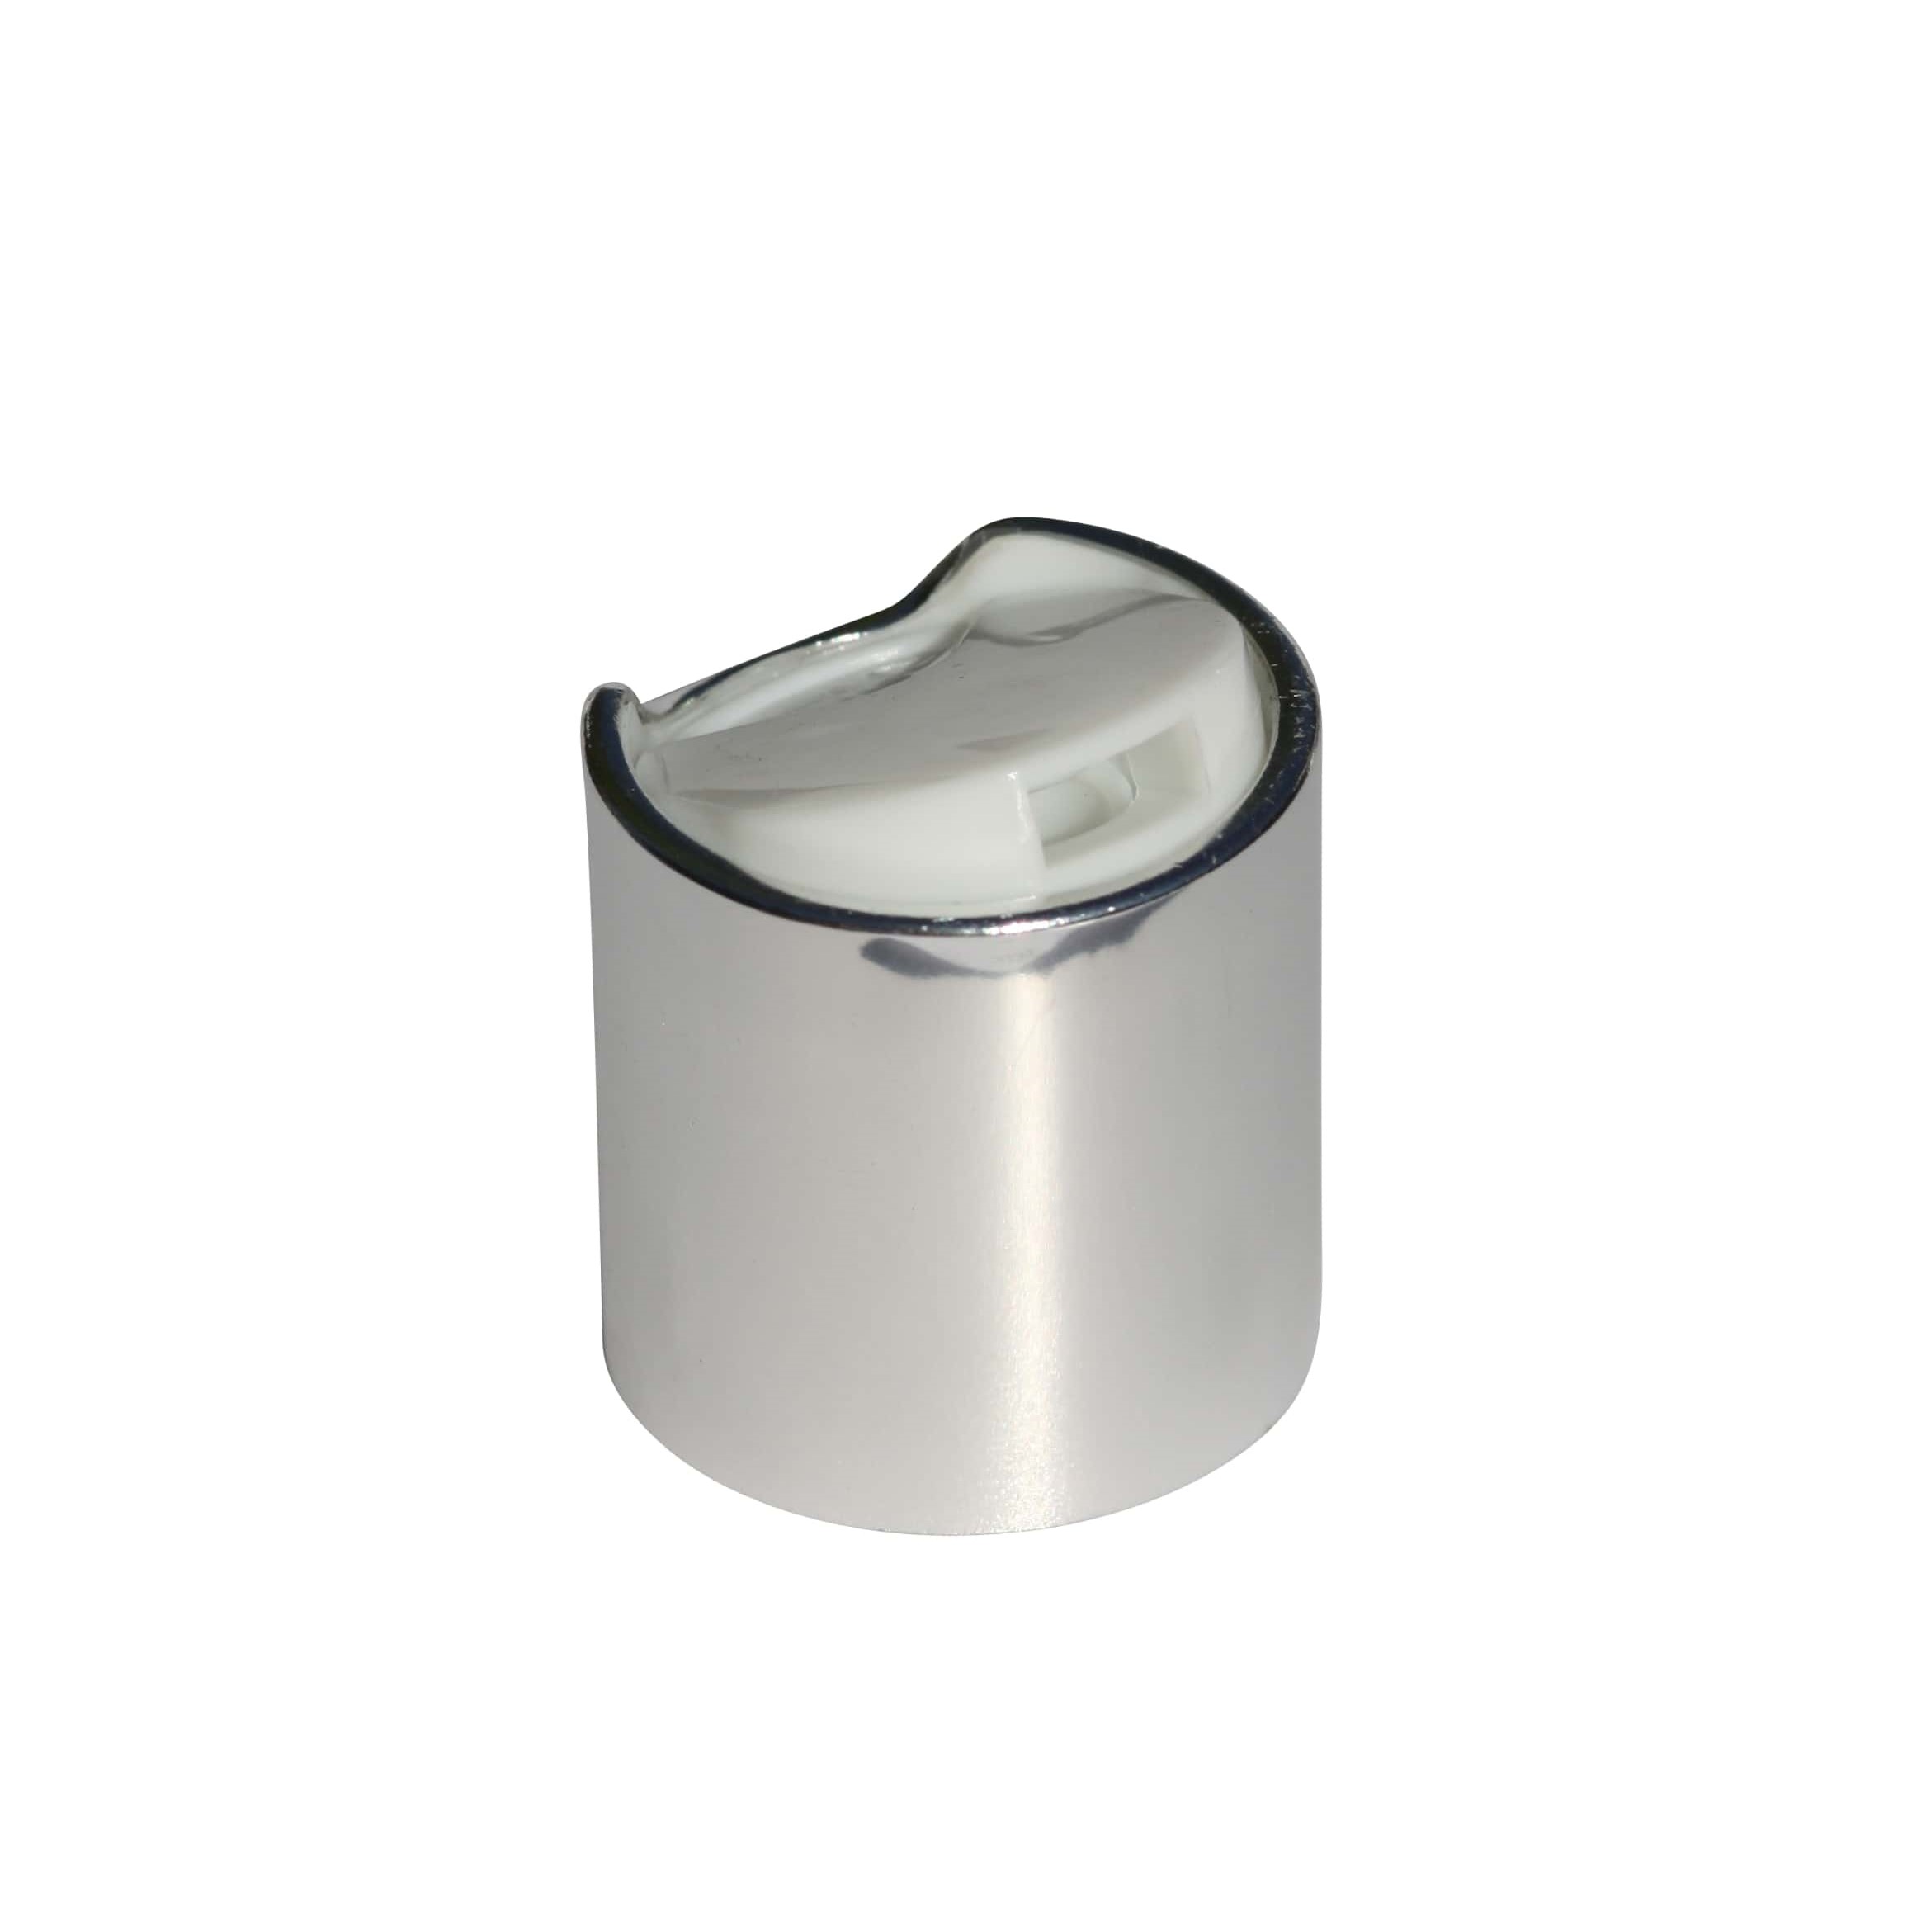 Screw cap with disc top, PP plastic, silver, for opening: GPI 24/410